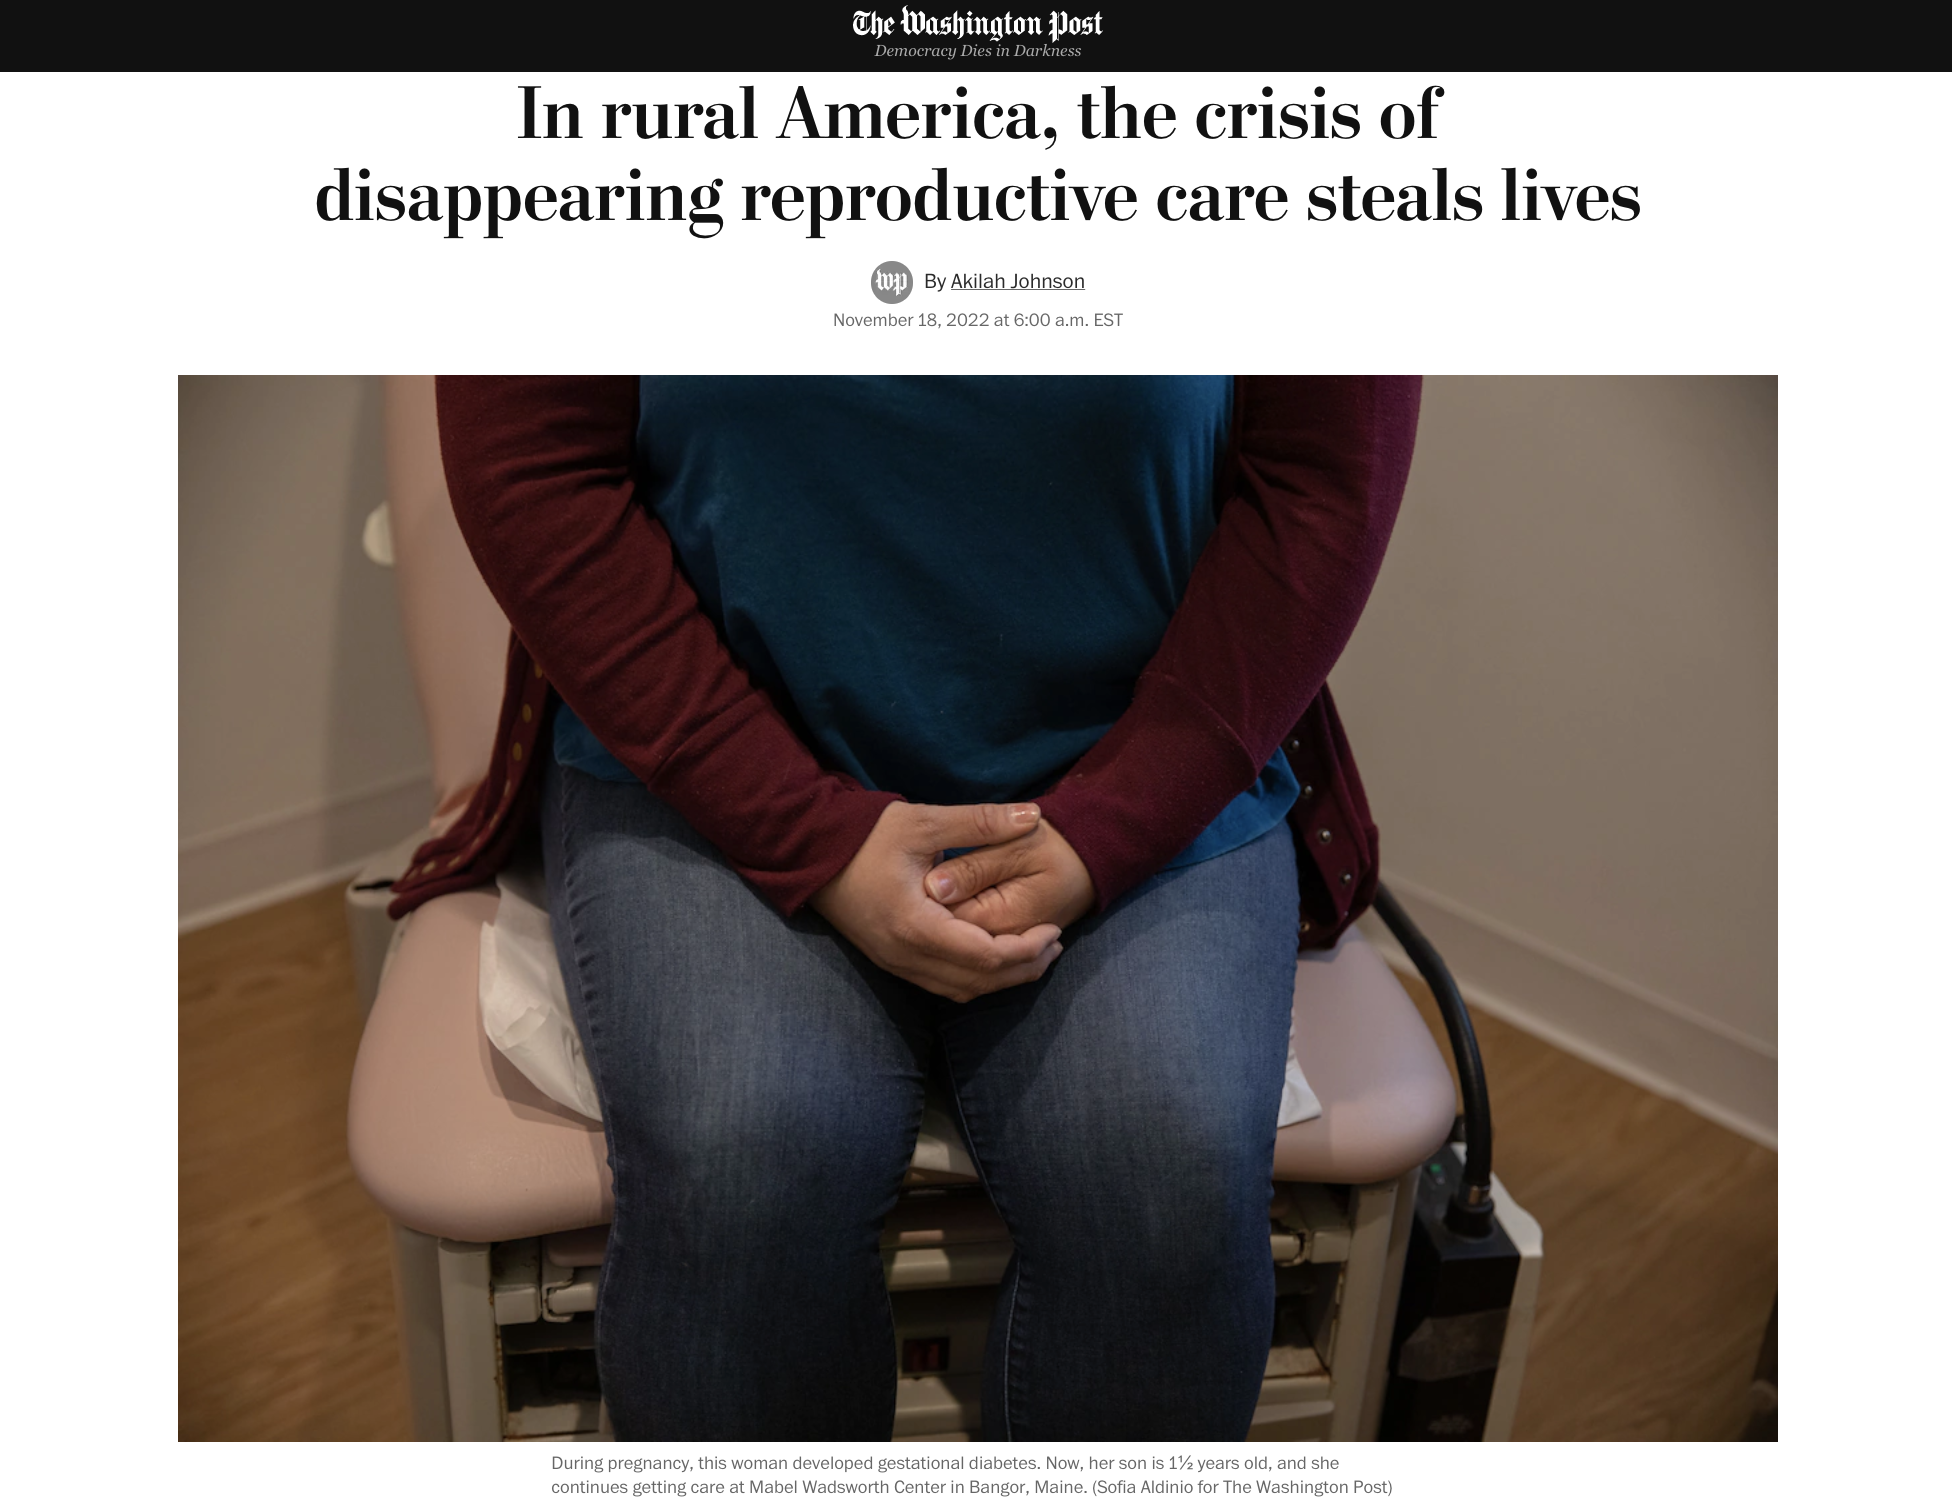 The Washington Post - In rural America, the crisis of disappearing reproductive care steals lives.